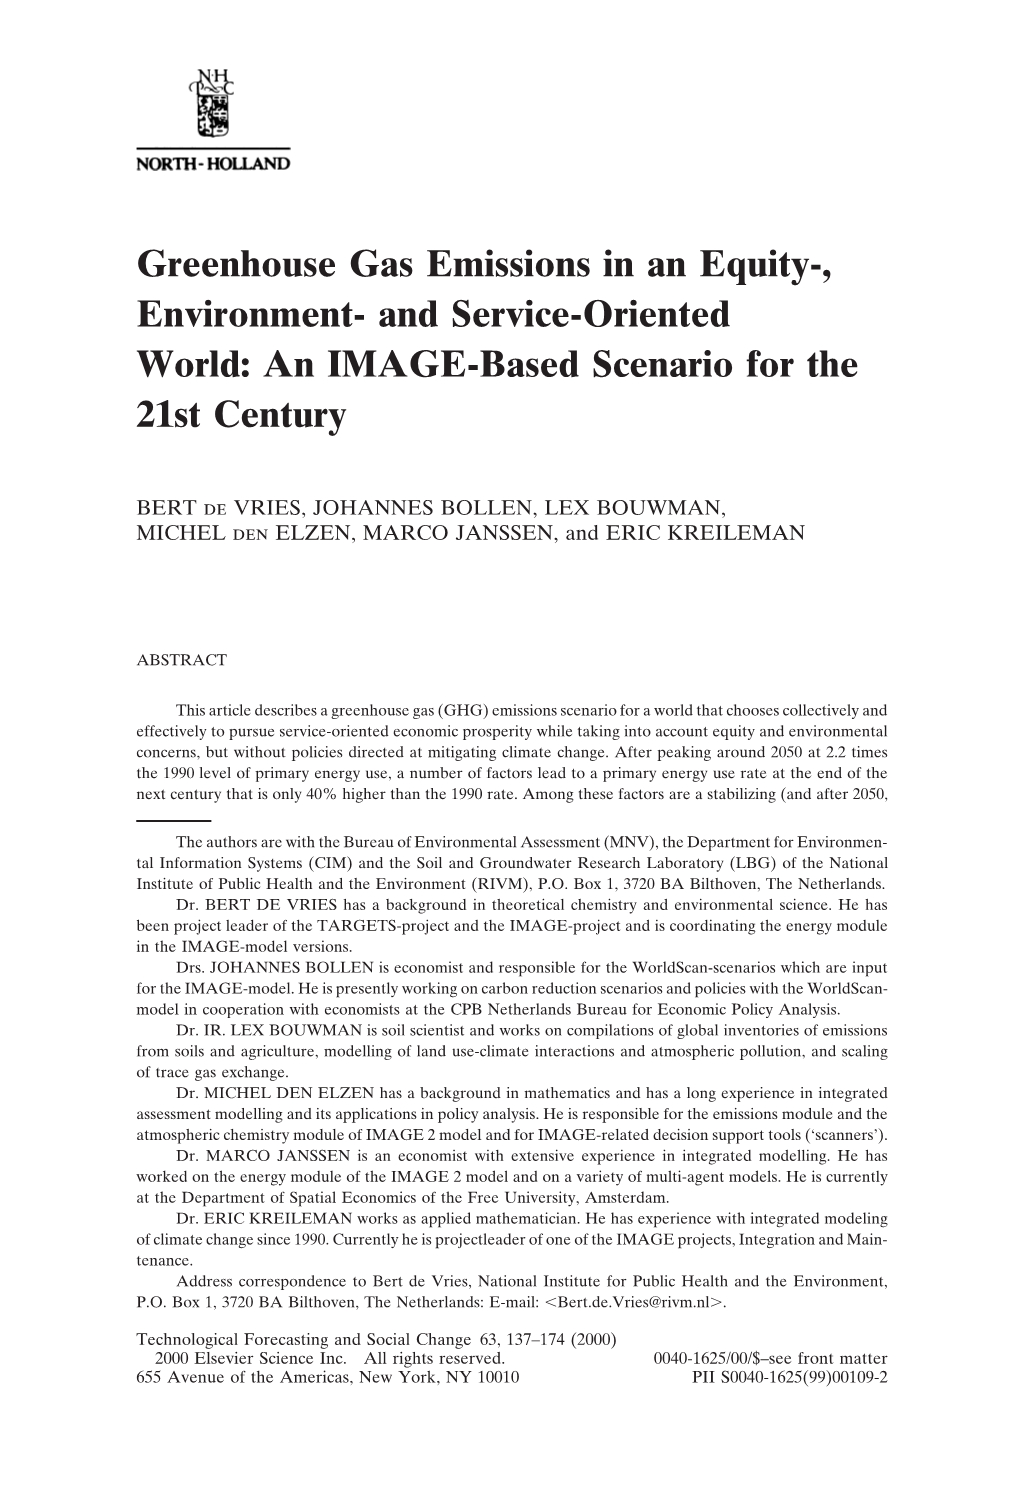 Greenhouse Gas Emissions in an Equity-, Environment- and Service-Oriented World: an IMAGE-Based Scenario for the 21St Century